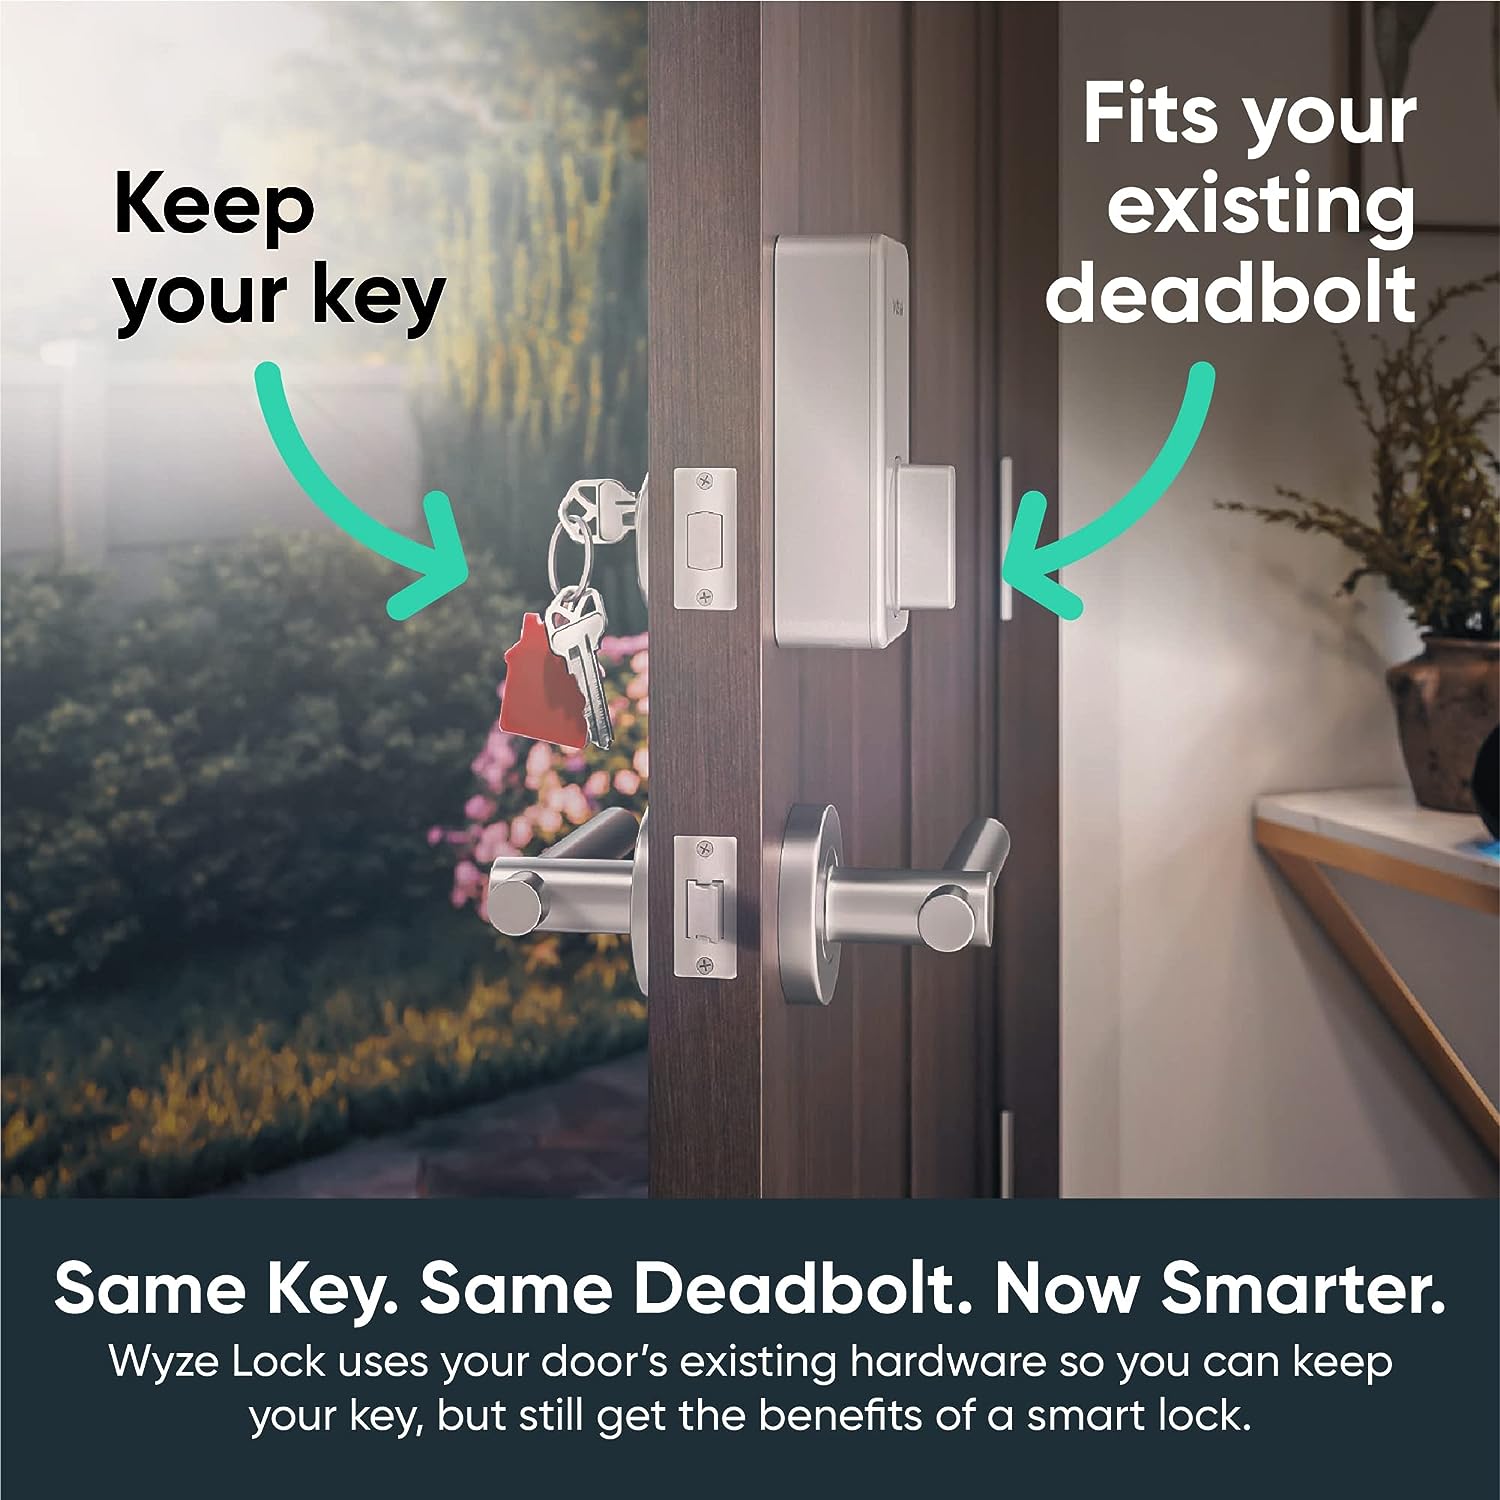 Keep the same key and fit over the exiting deadbolt. Wyze smart lock solutions for aging in place | AskSAMIE